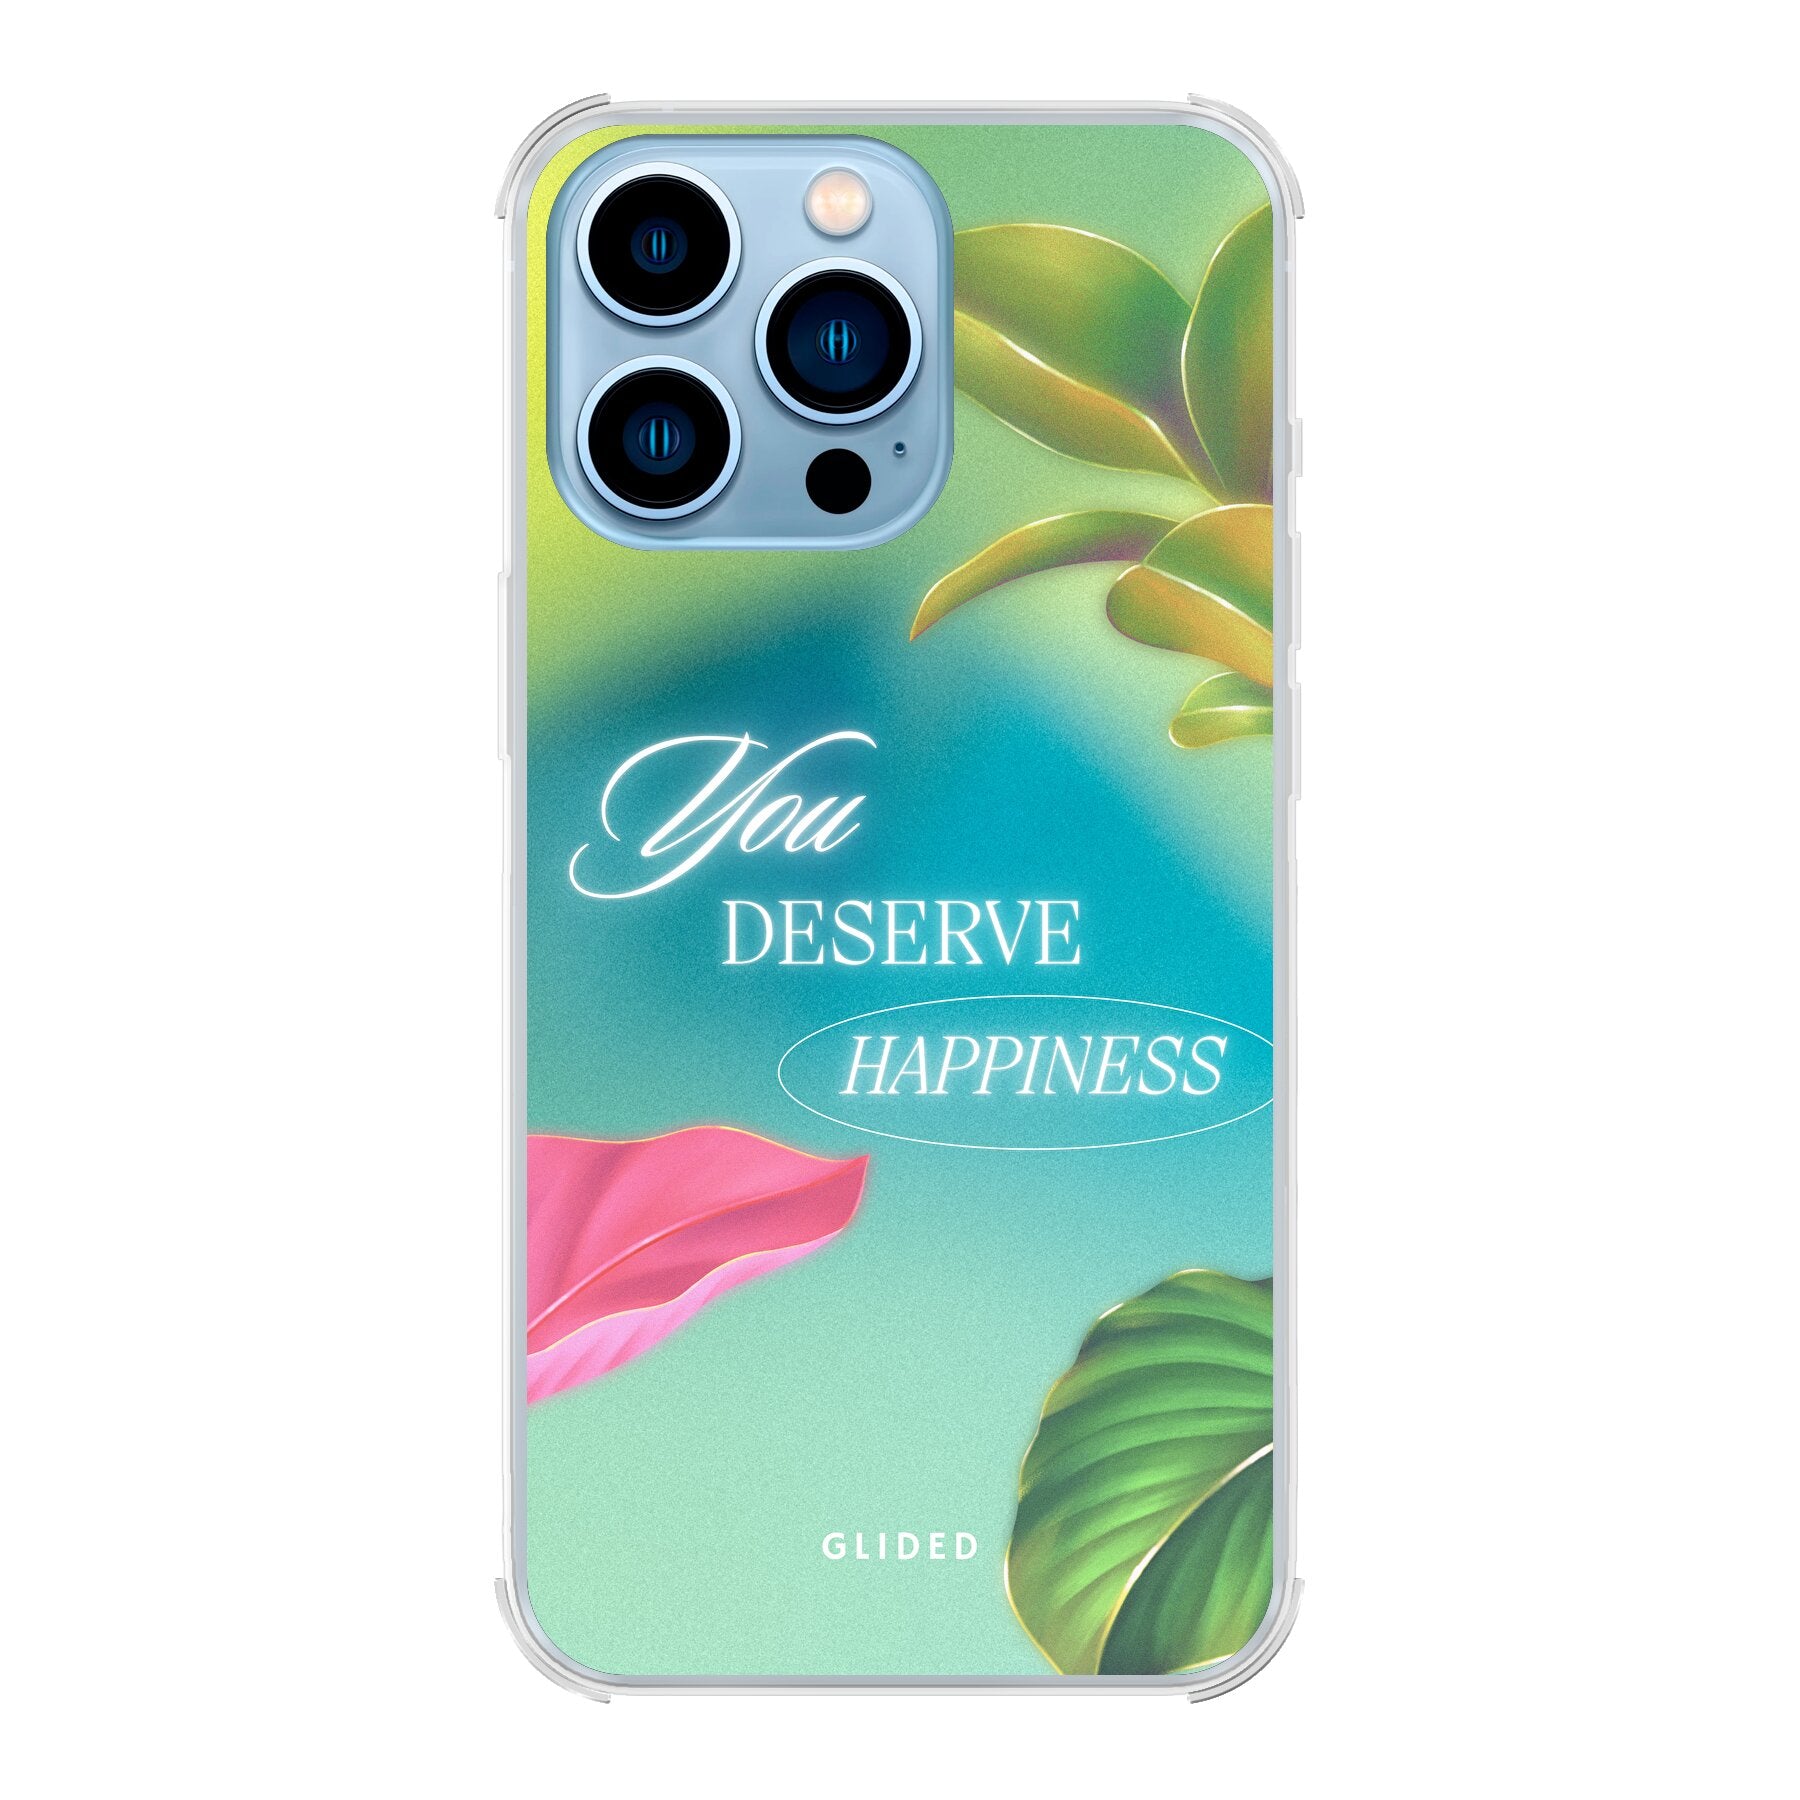 Happiness - iPhone 13 Pro Max - Bumper case